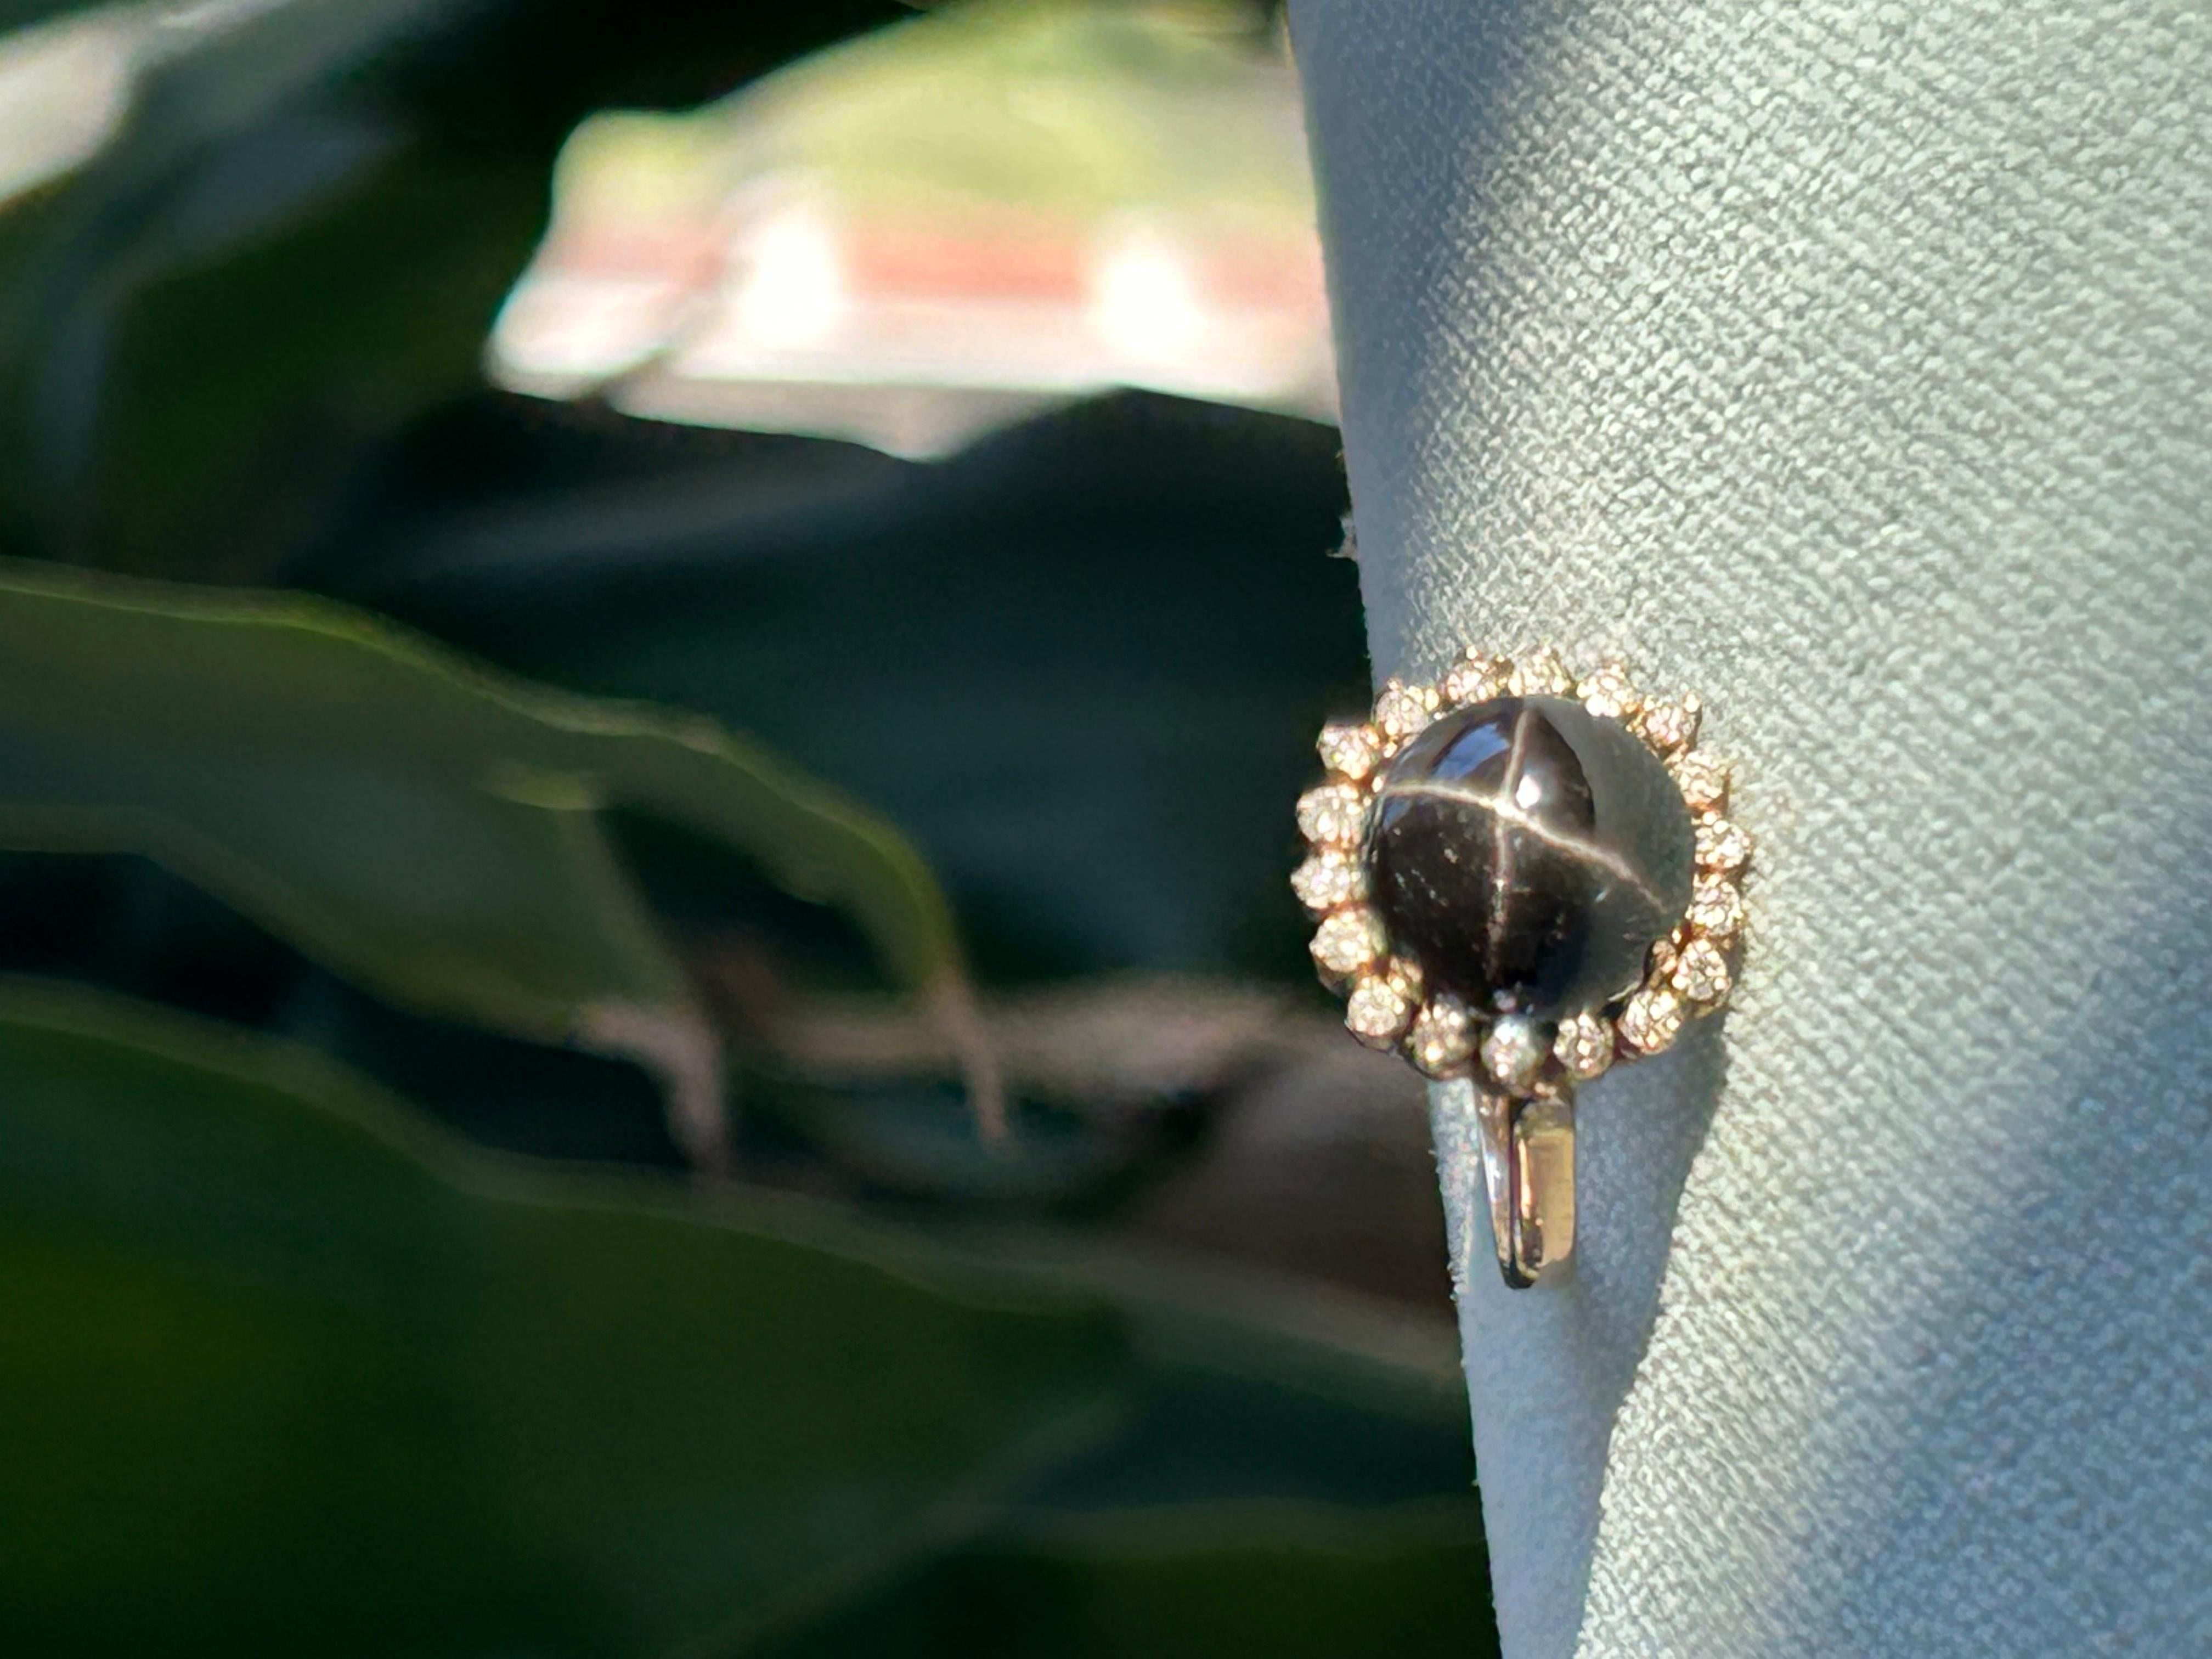 Vintage Black Star Diopside Cabochon Diamond Ring 18k In Excellent Condition For Sale In Joelton, TN